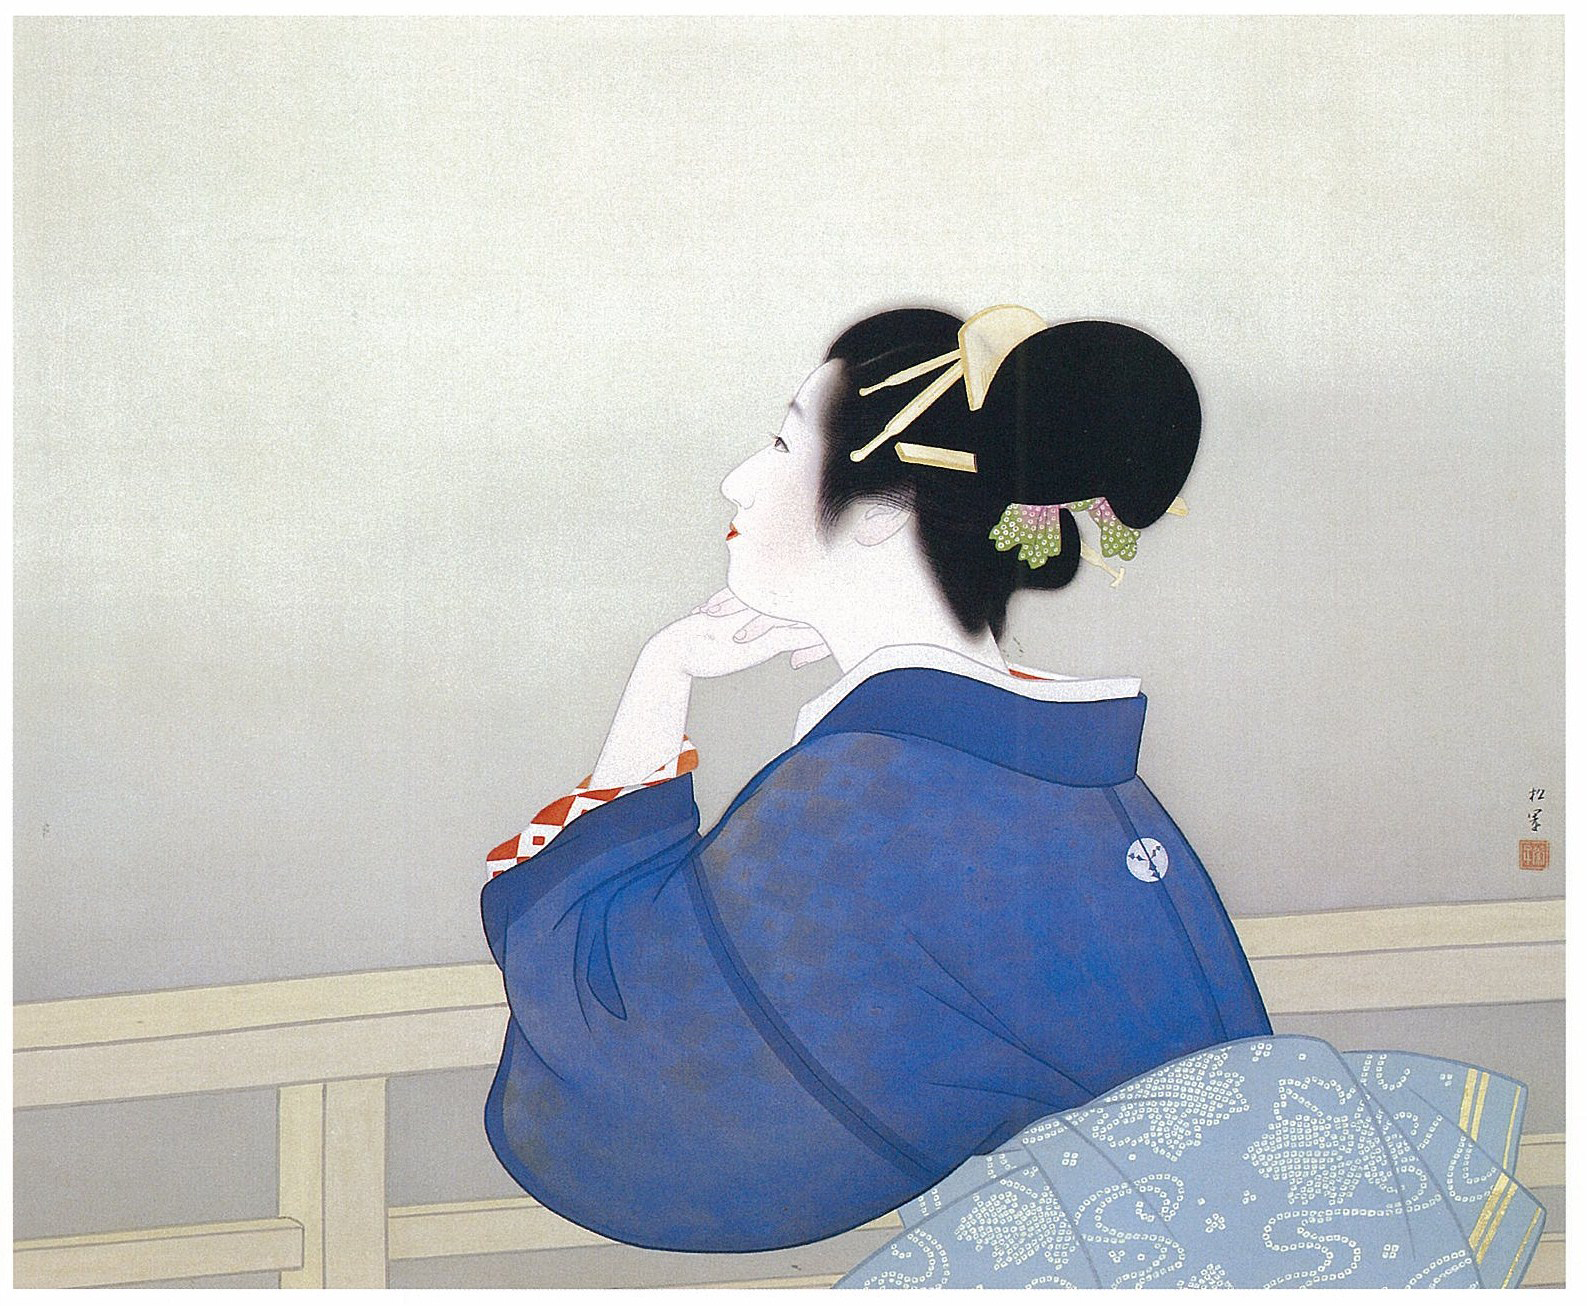 Woman Waiting for the Moon to Rise by Uemura Shōen - 1944 - 86 x 73 cm Adachi Museum of Art